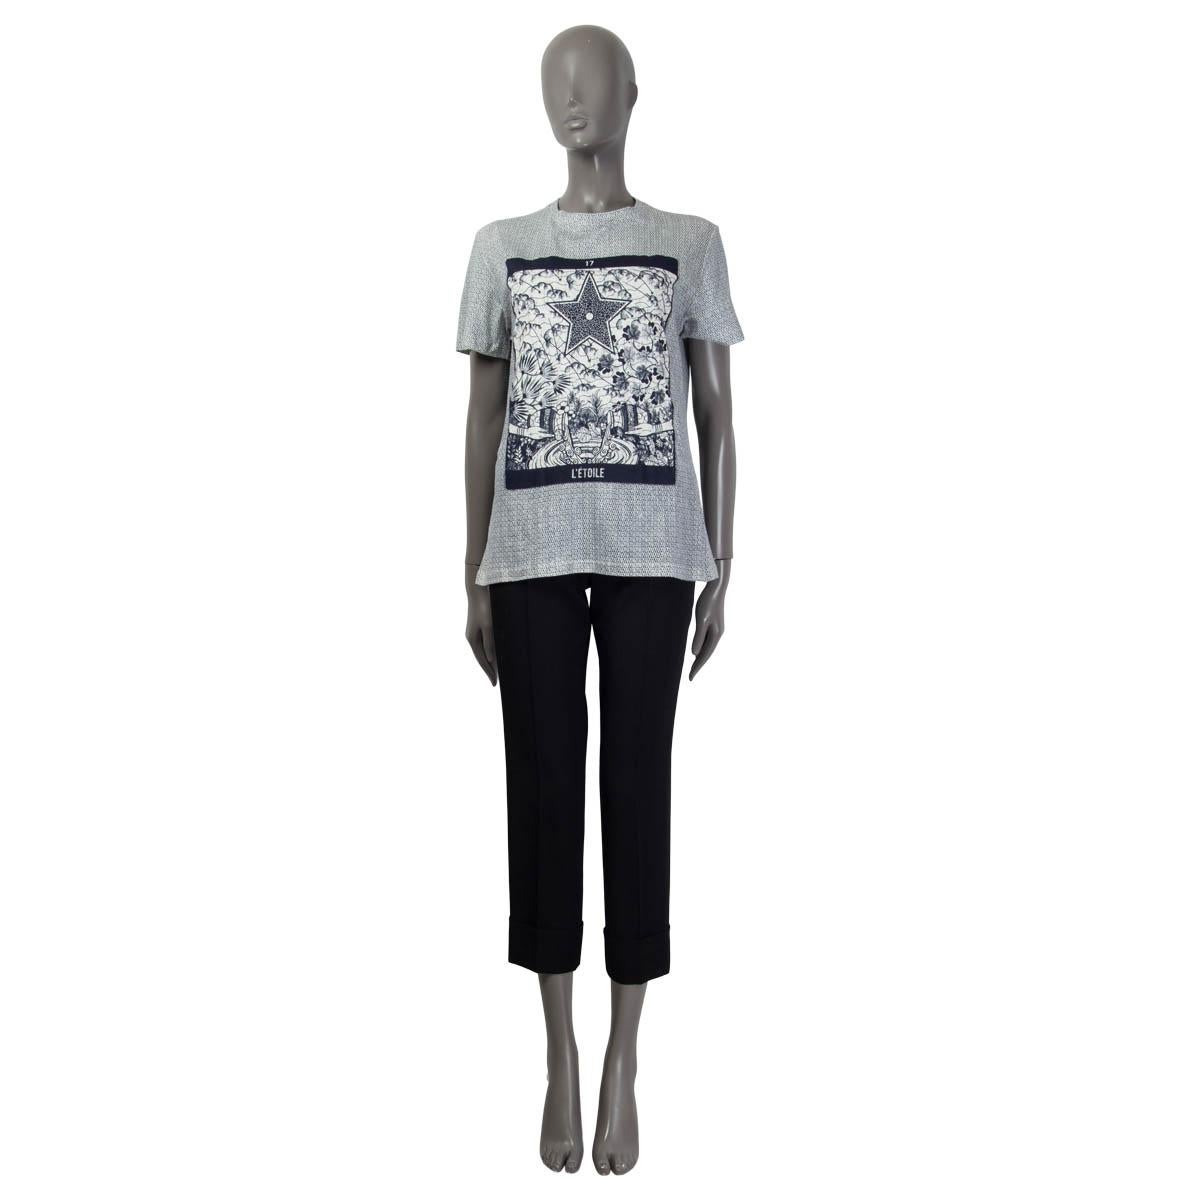 100% authentic Christian Dior 2020 Tarot Etoile t-shirt in blue and off-white cotton (86%) and linen (14%). Features short sleeves. Unlined. Has been worn and is in excellent condition.

Tag Size	M
Size	M
Shoulder Width	42cm (16.4in)
Bust	100cm